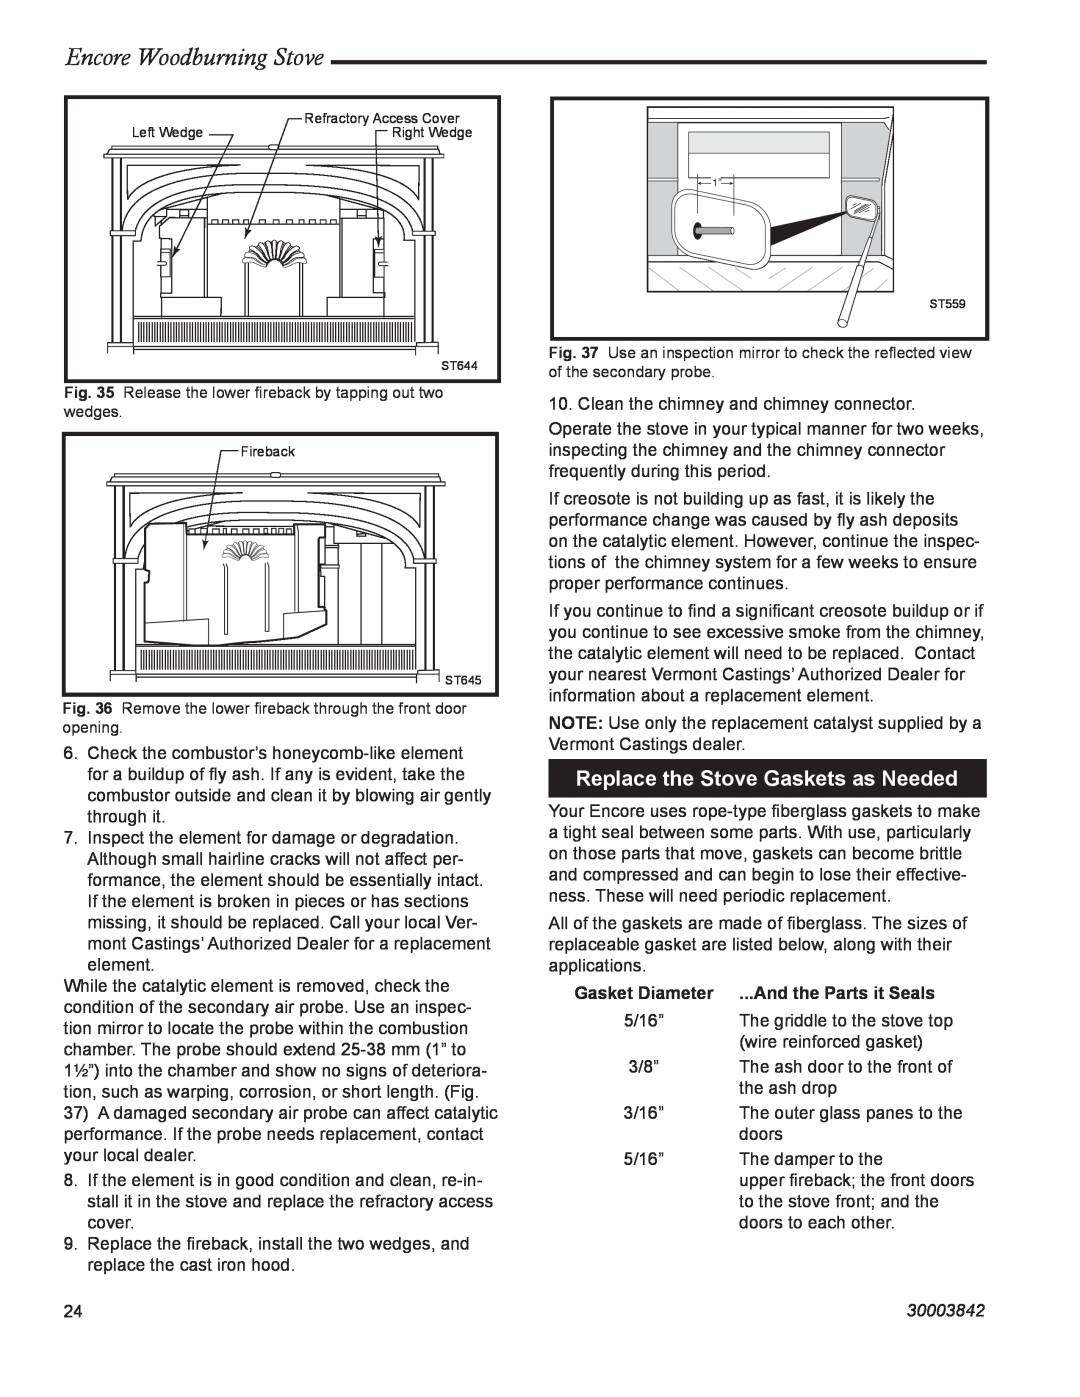 Vermont Casting 2550CE installation instructions Replace the Stove Gaskets as Needed, Encore Woodburning Stove, 30003842 